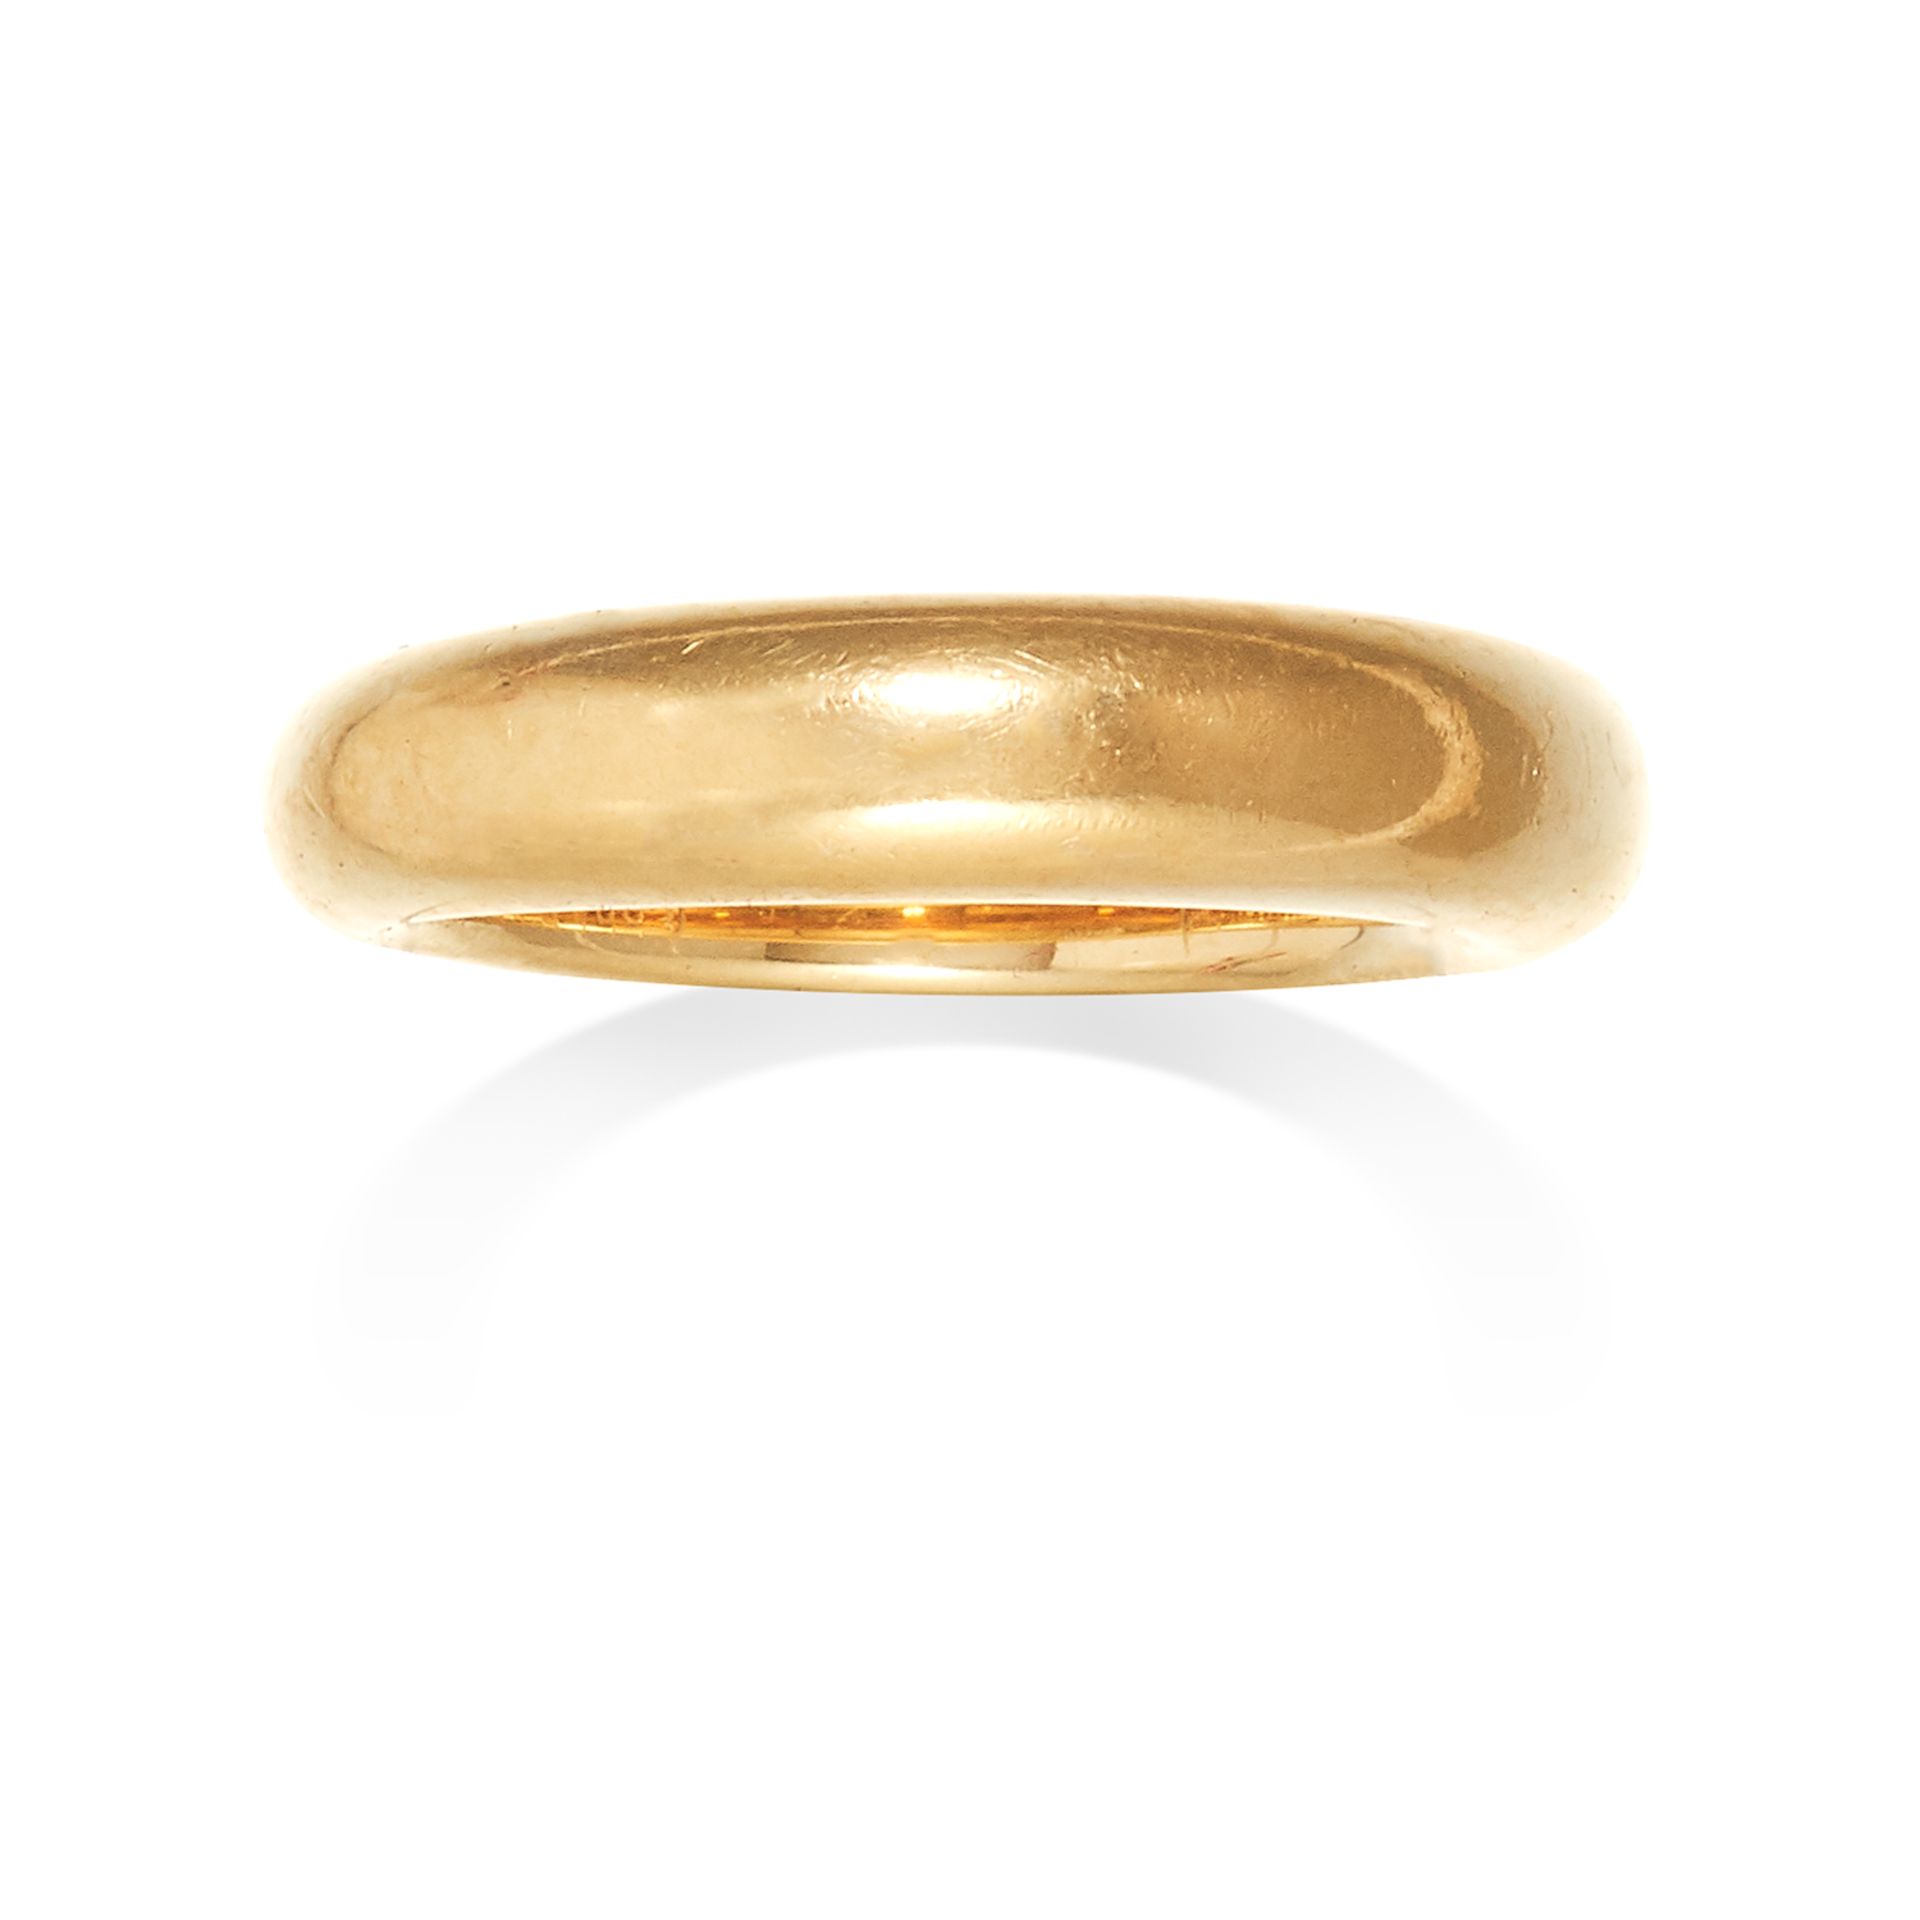 A GOLD RING, CARTIER in 18ct yellow gold, designed as thick gold band, signed Cartier and